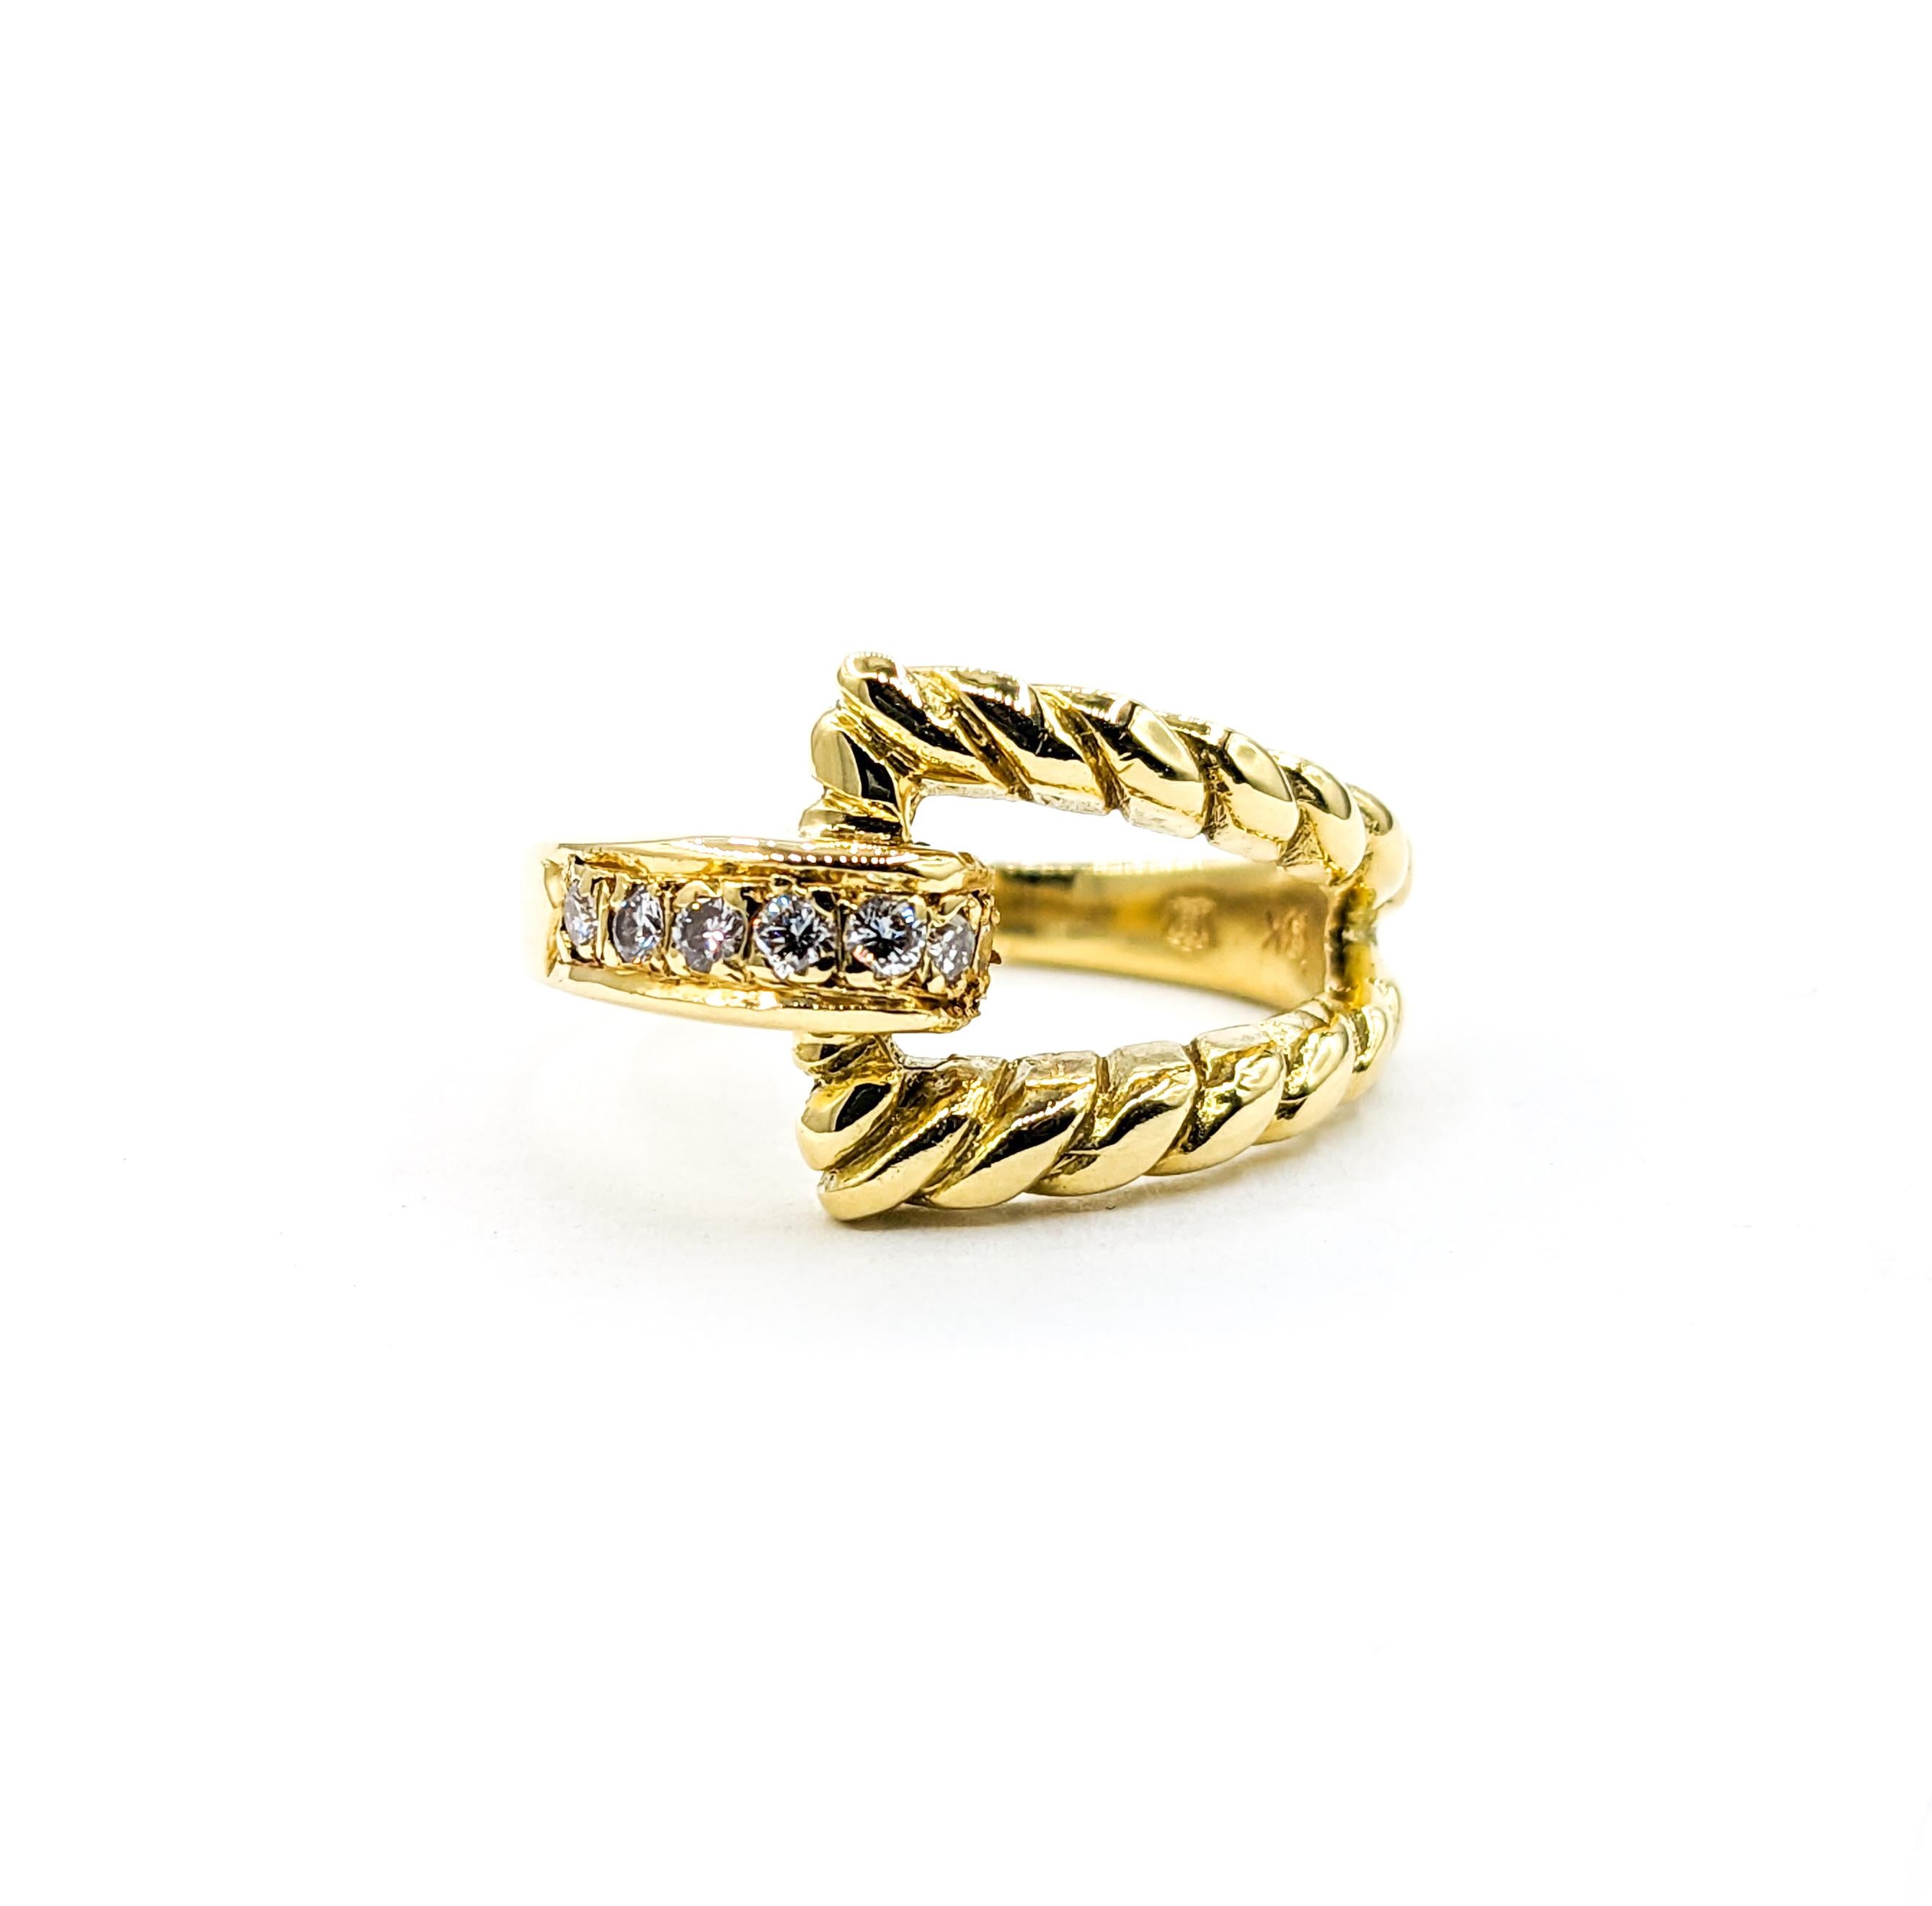 Diamond 3-Row Cable Ring in 18k Yellow Gold

Discover elegance with this stunning ring, meticulously fashioned in 18k yellow gold. It showcases a dazzling array of round diamonds, totaling 0.07 carats. Each diamond is carefully selected for its SI